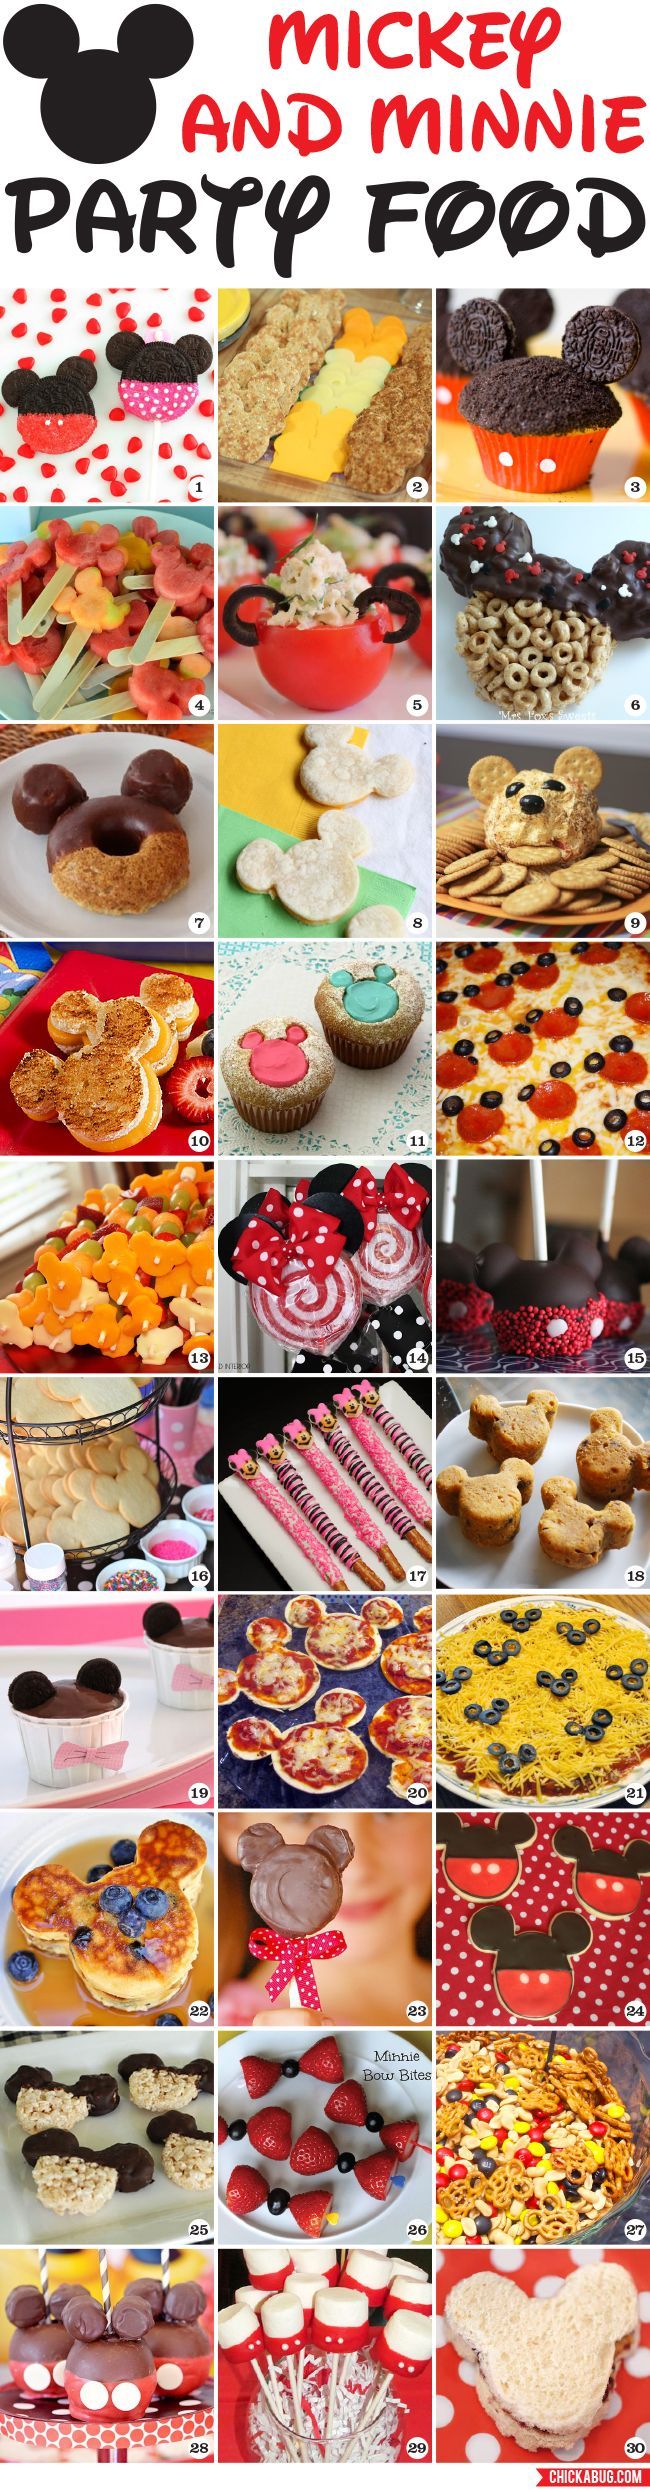 30 awesome Mickey Mouse and Minnie Mouse party food ideas | Chickabug